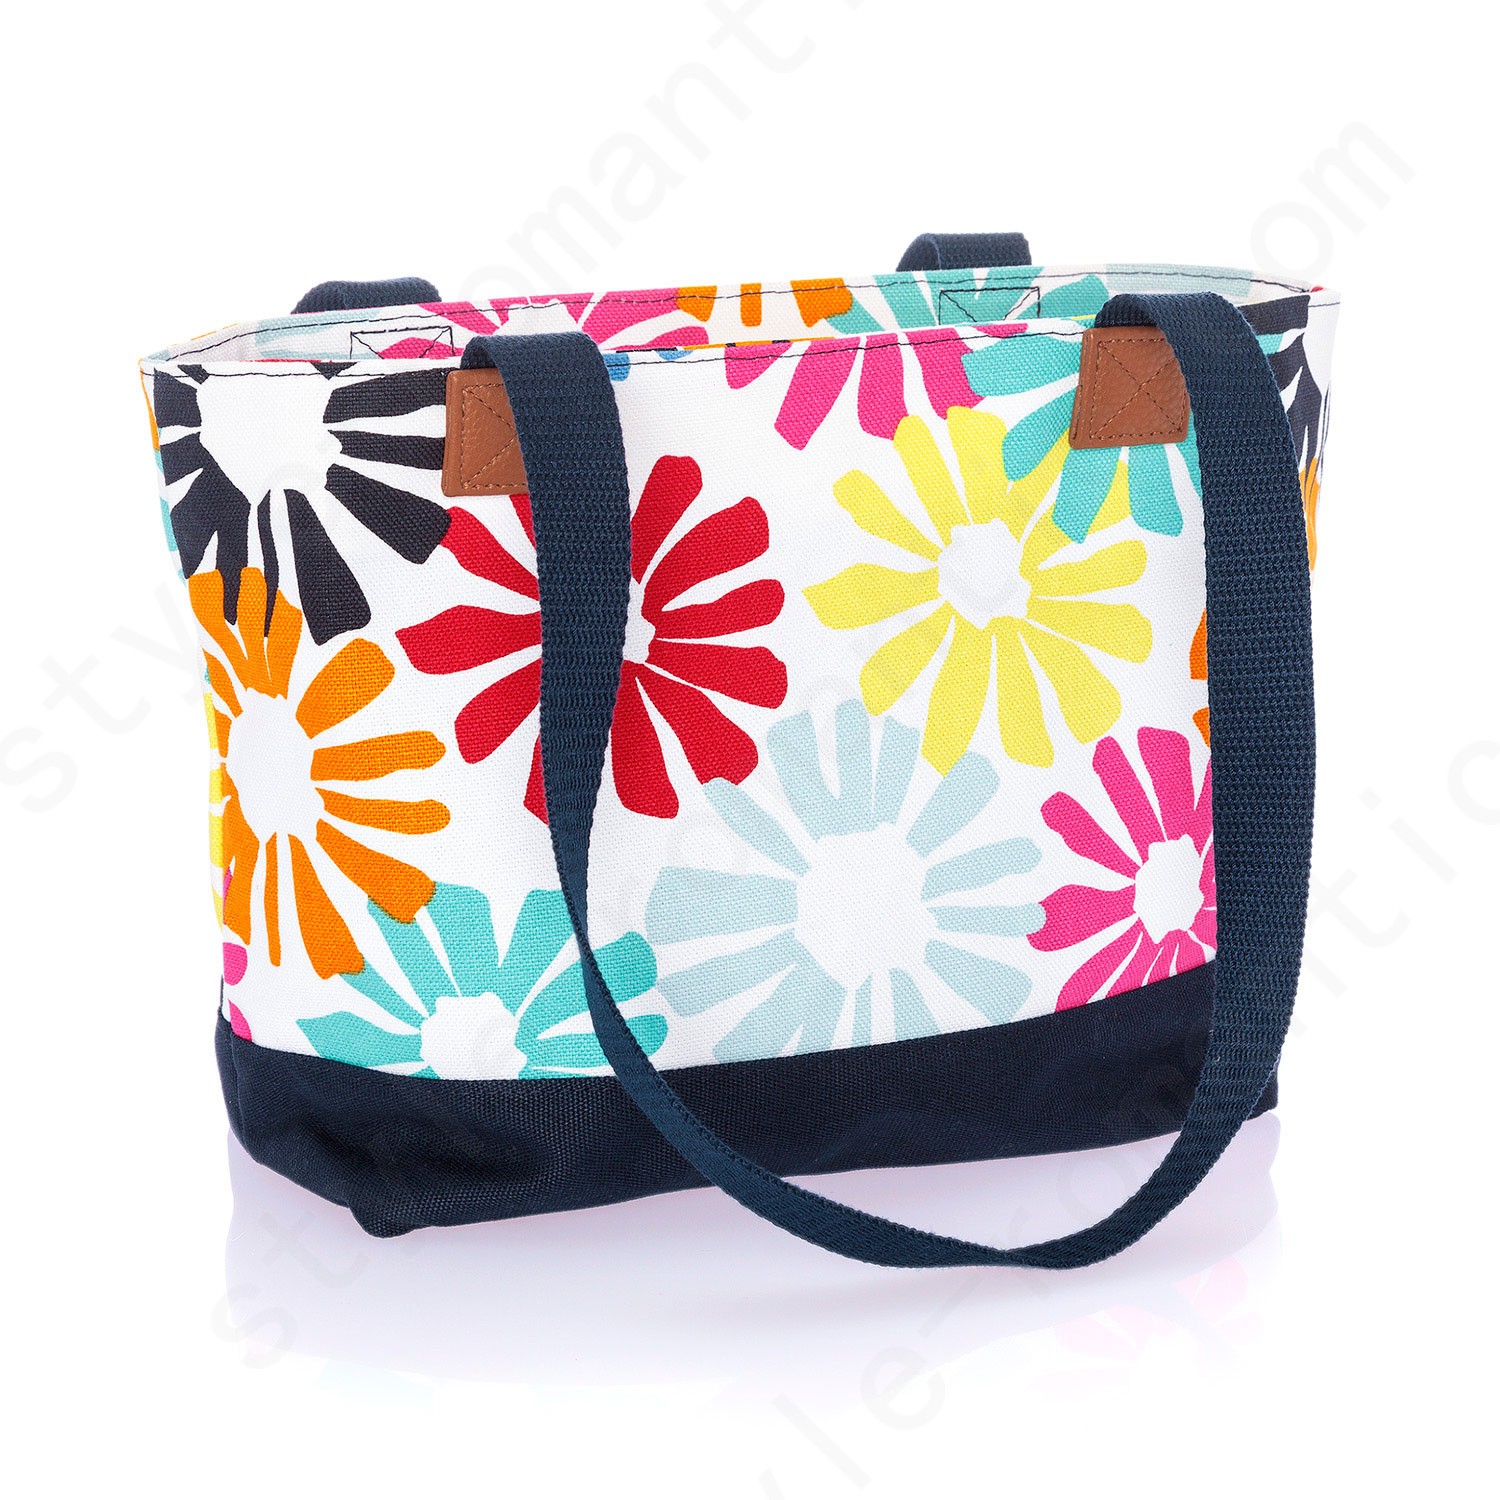 Thirty-One Gifts Demi Day Bags - Bloomin' Bouquet - Thirty-One Gifts Demi Day Bags - Bloomin' Bouquet